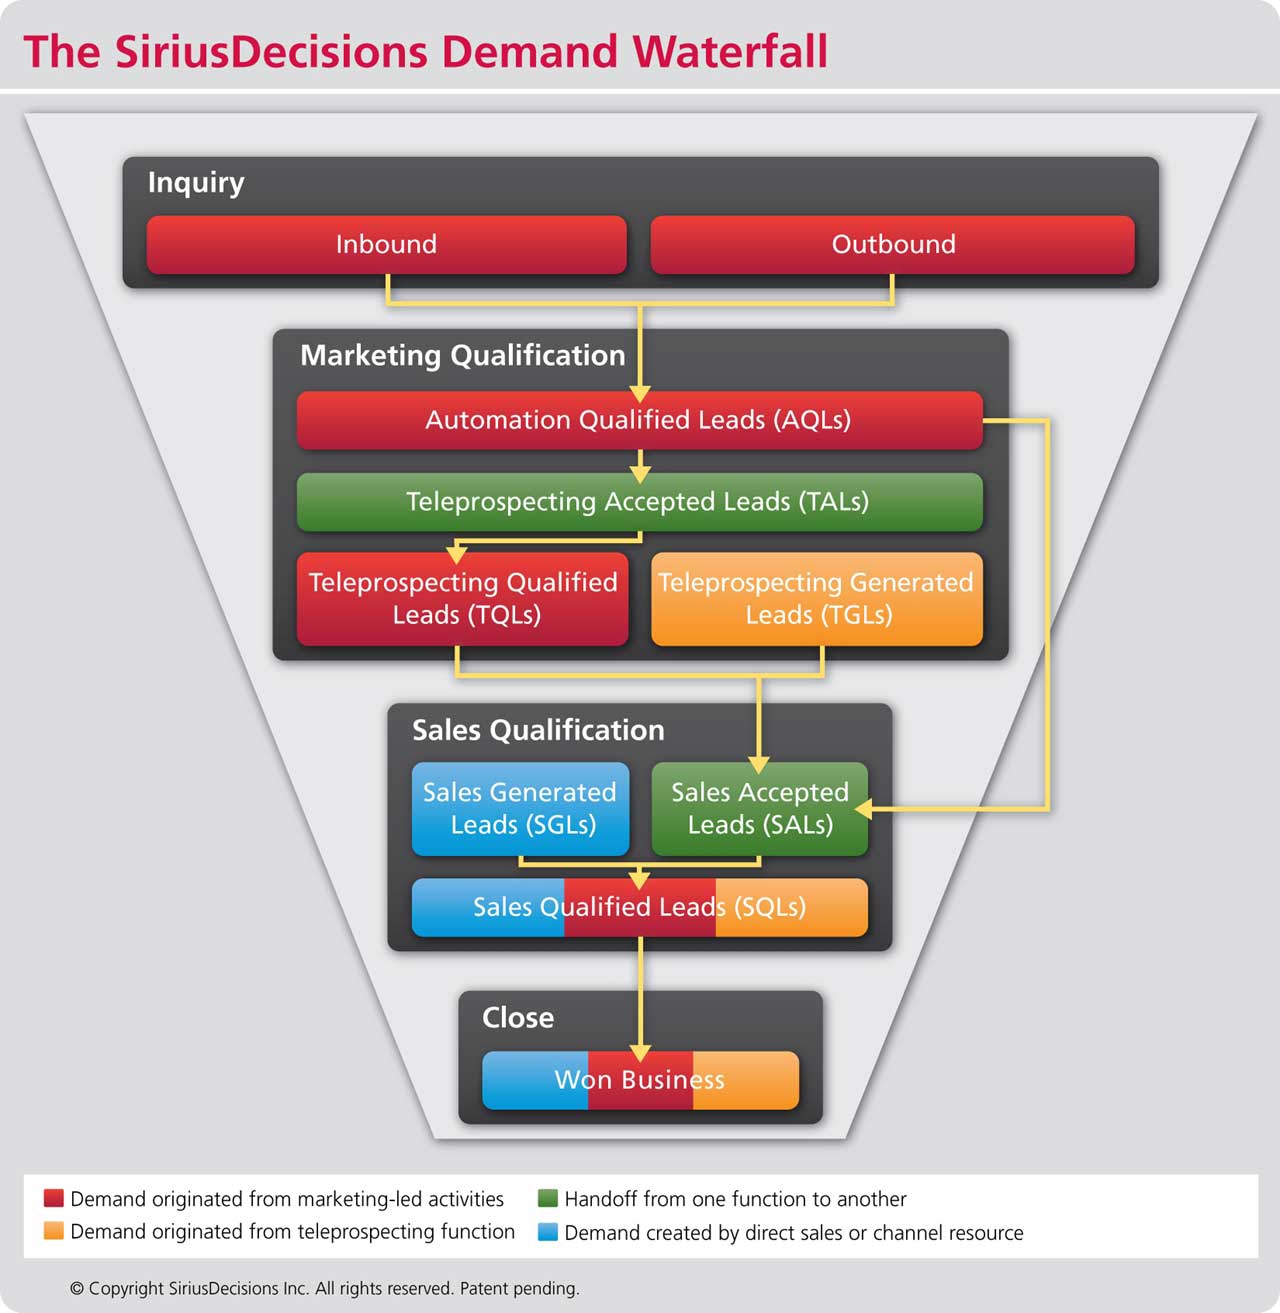 3 Tips for Navigating the New 'Demand Waterfall' and Marketing Funnel